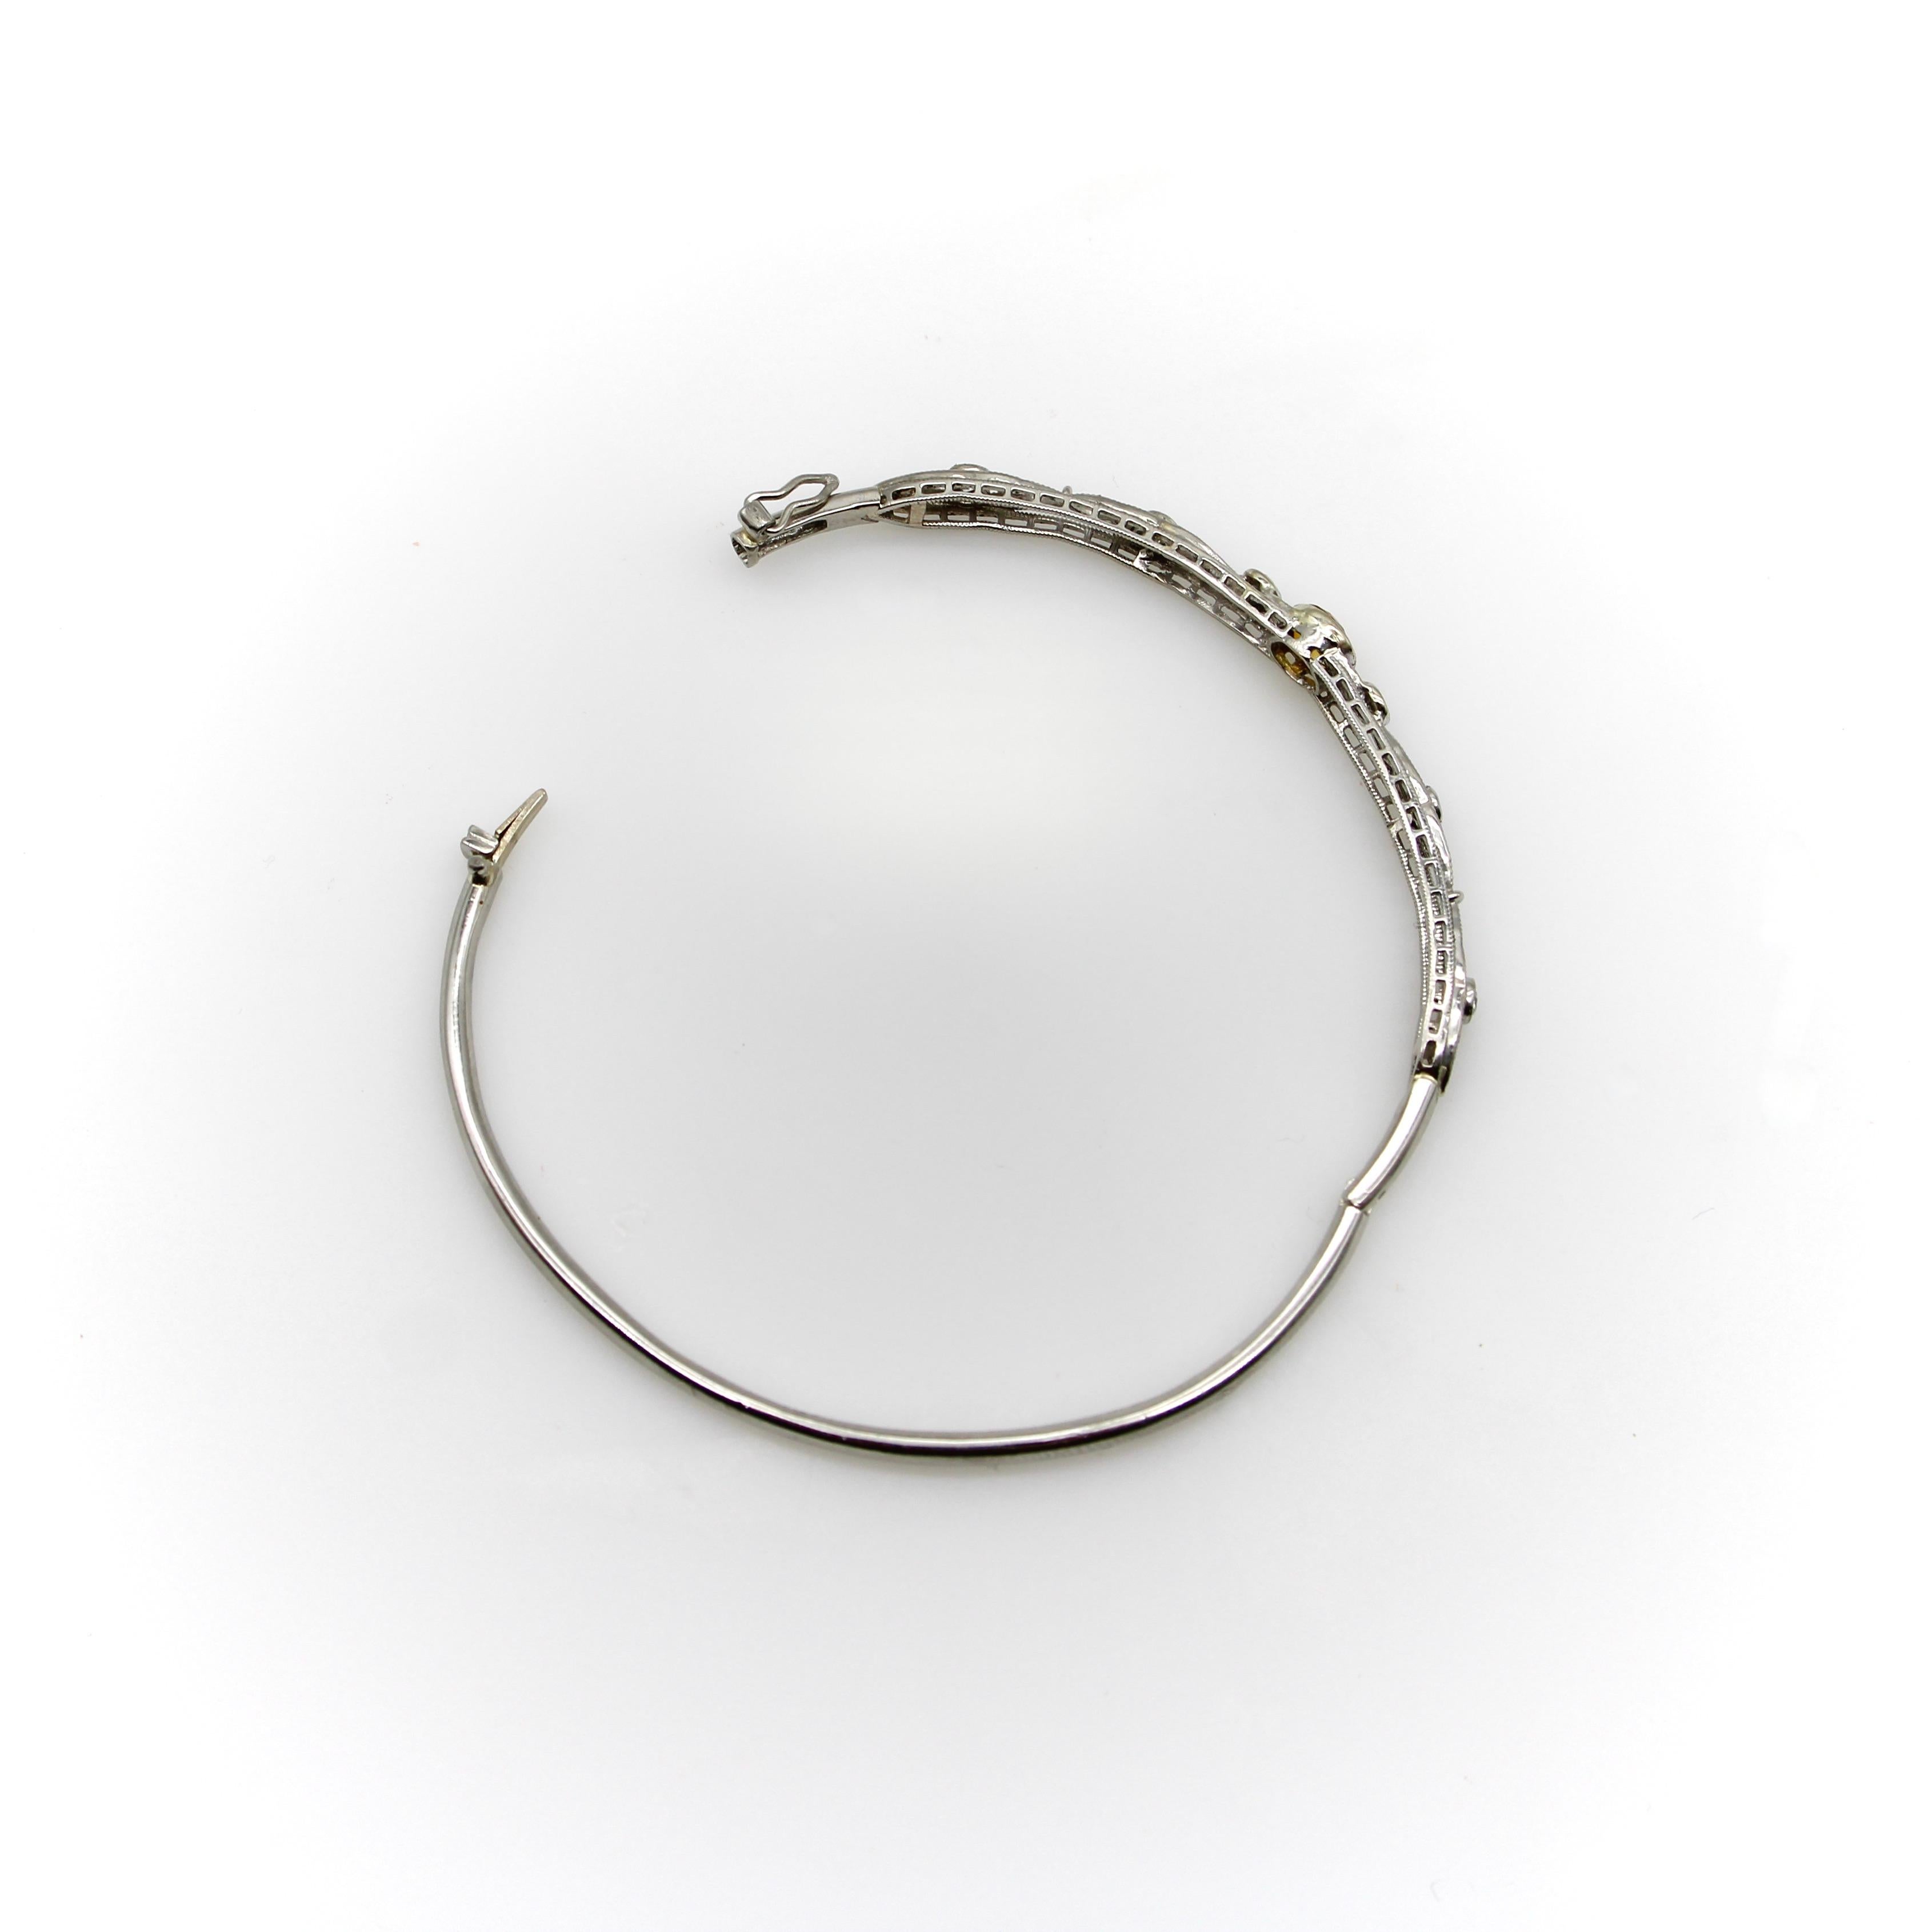 One of our favorite things to do here at Kirsten’s Corner is find bar pins from the Edwardian and Art Deco eras and have our jeweler gently bend them into beautiful bangles. This piece began as a platinum brooch with an orange-yellow saturated